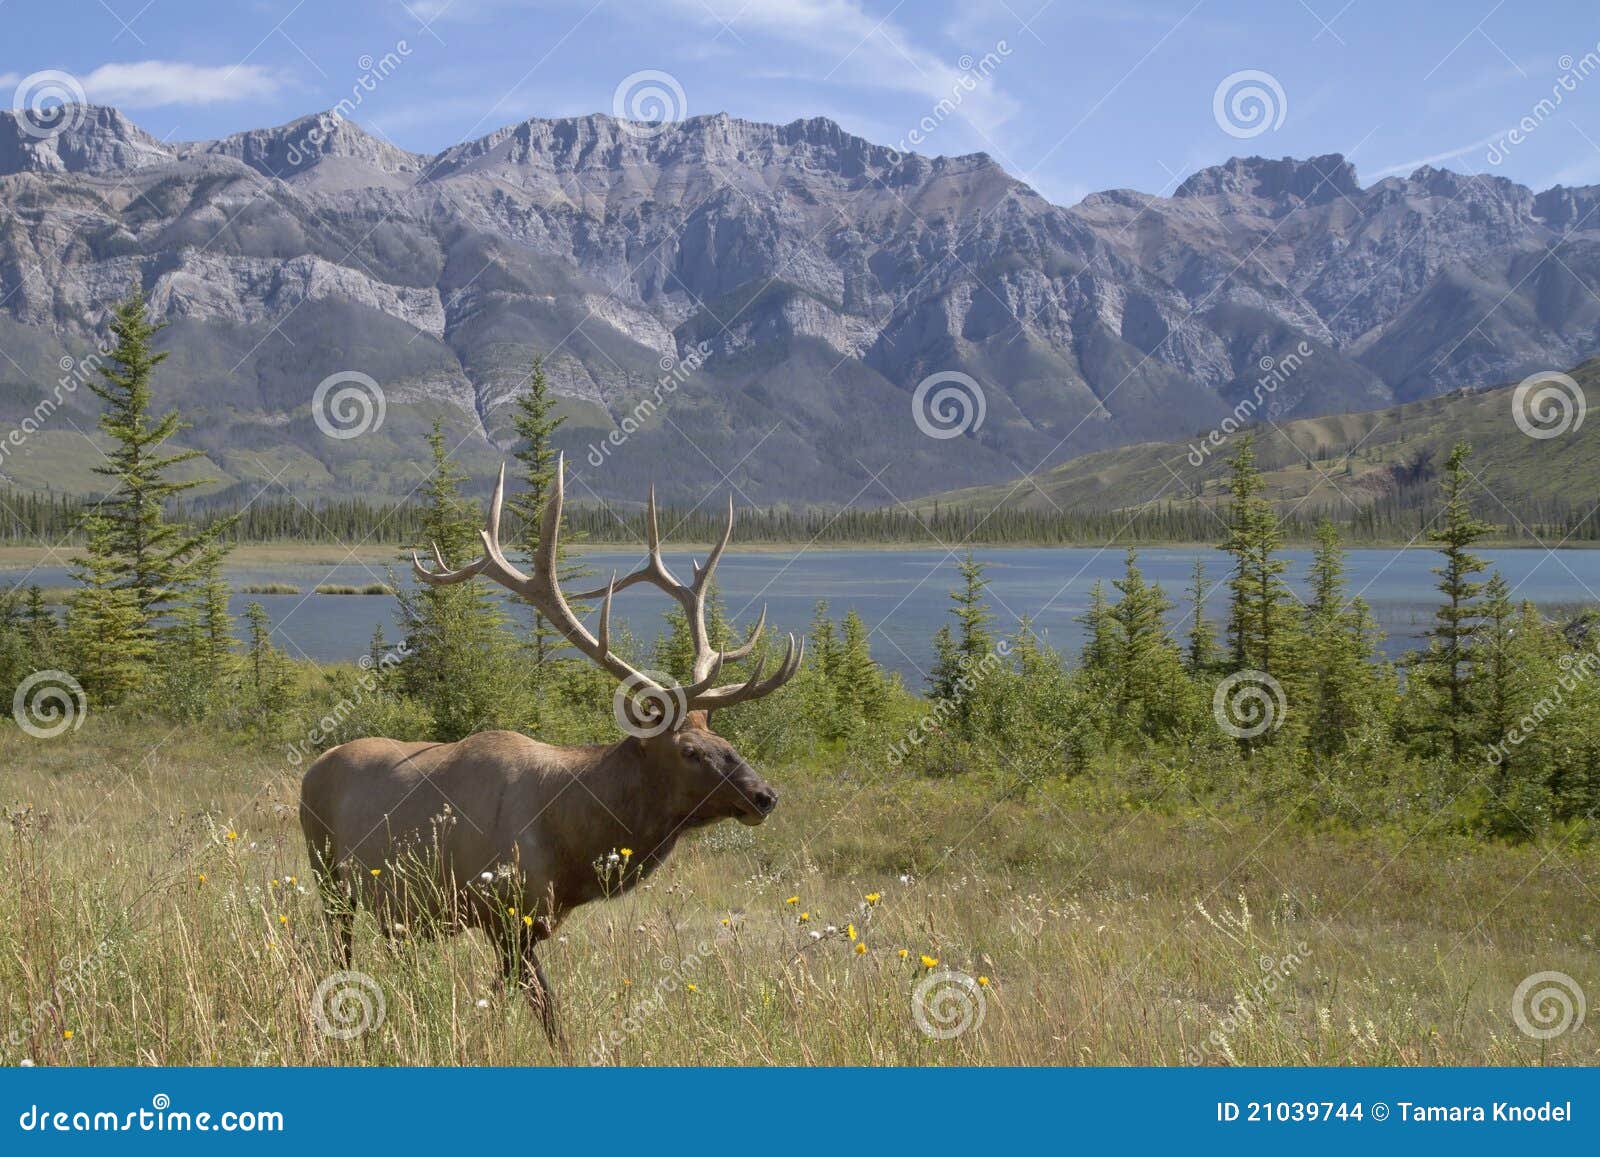 Elk in the mountains stock photo. Image of tree, antlers 